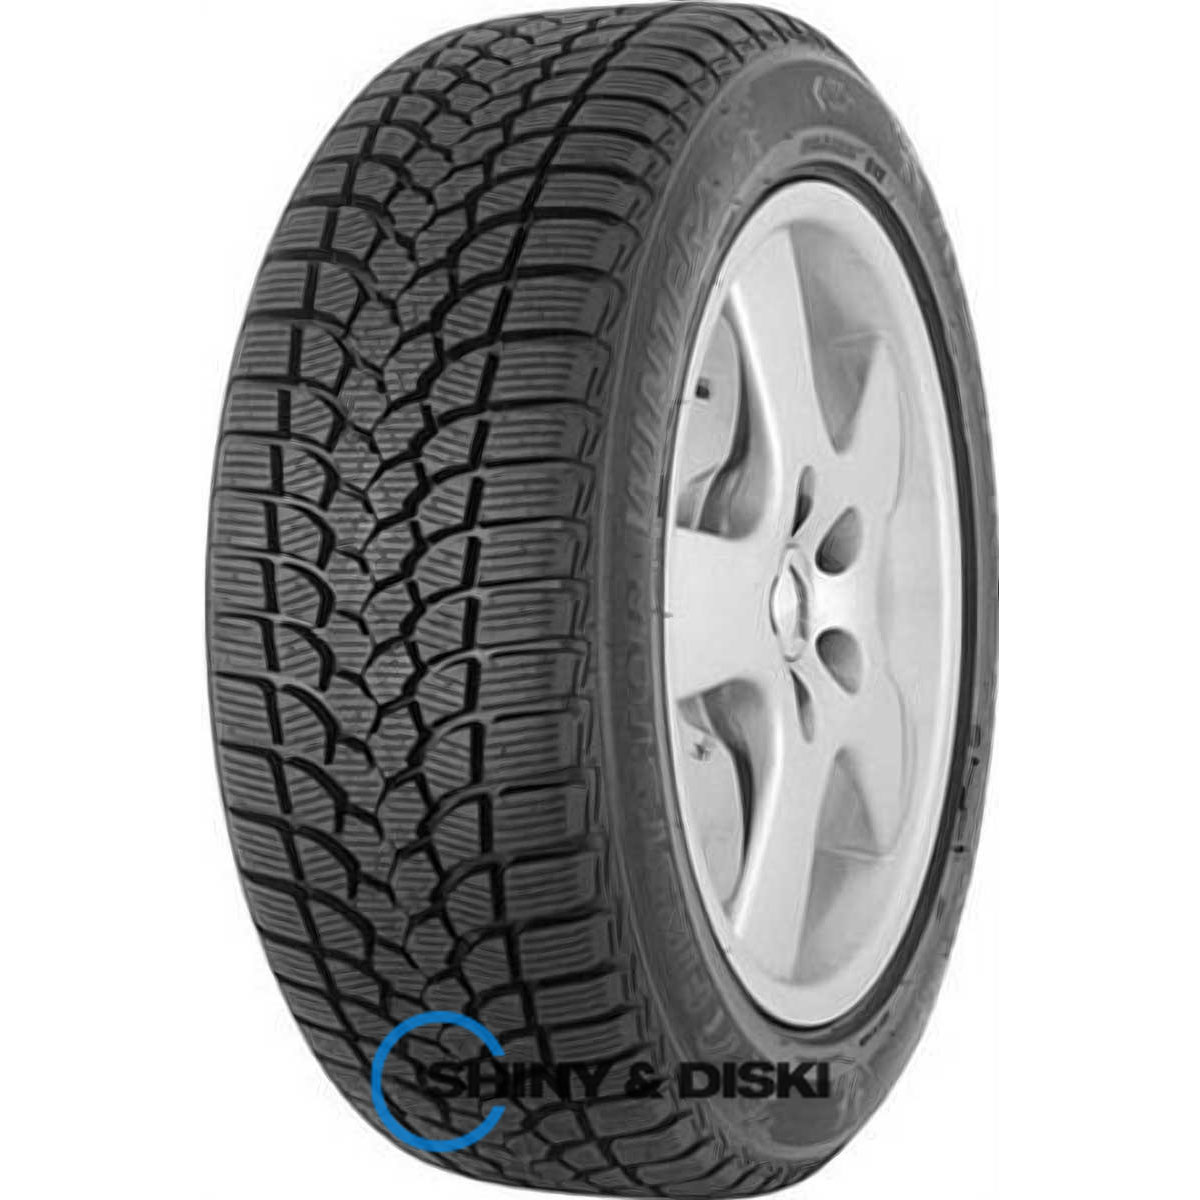 firststop winter 2 185/60 r15 84t